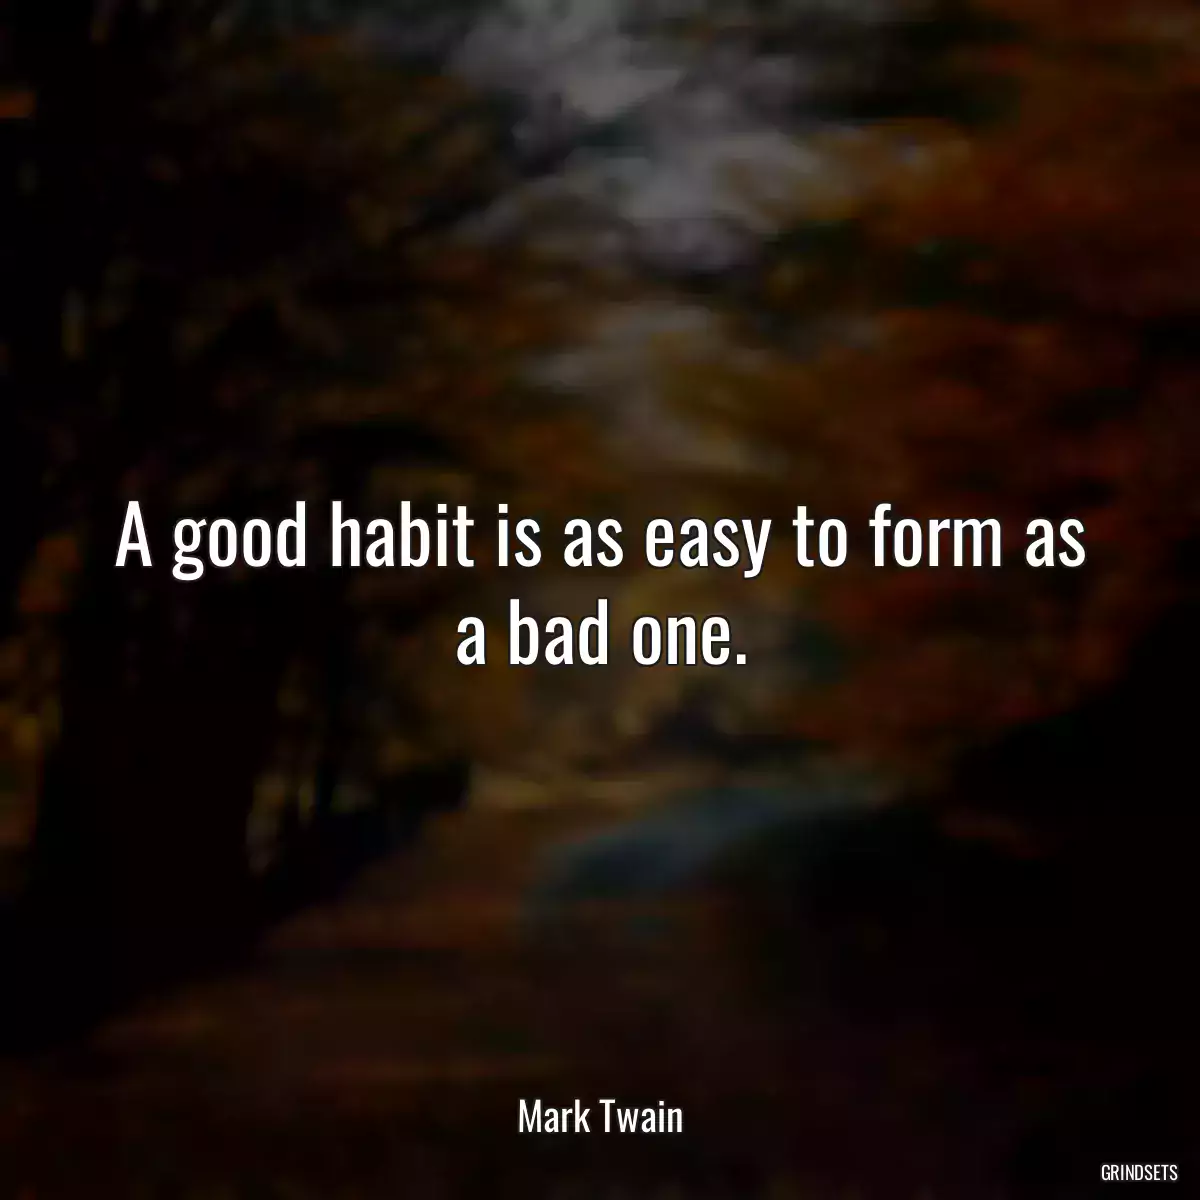 A good habit is as easy to form as a bad one.